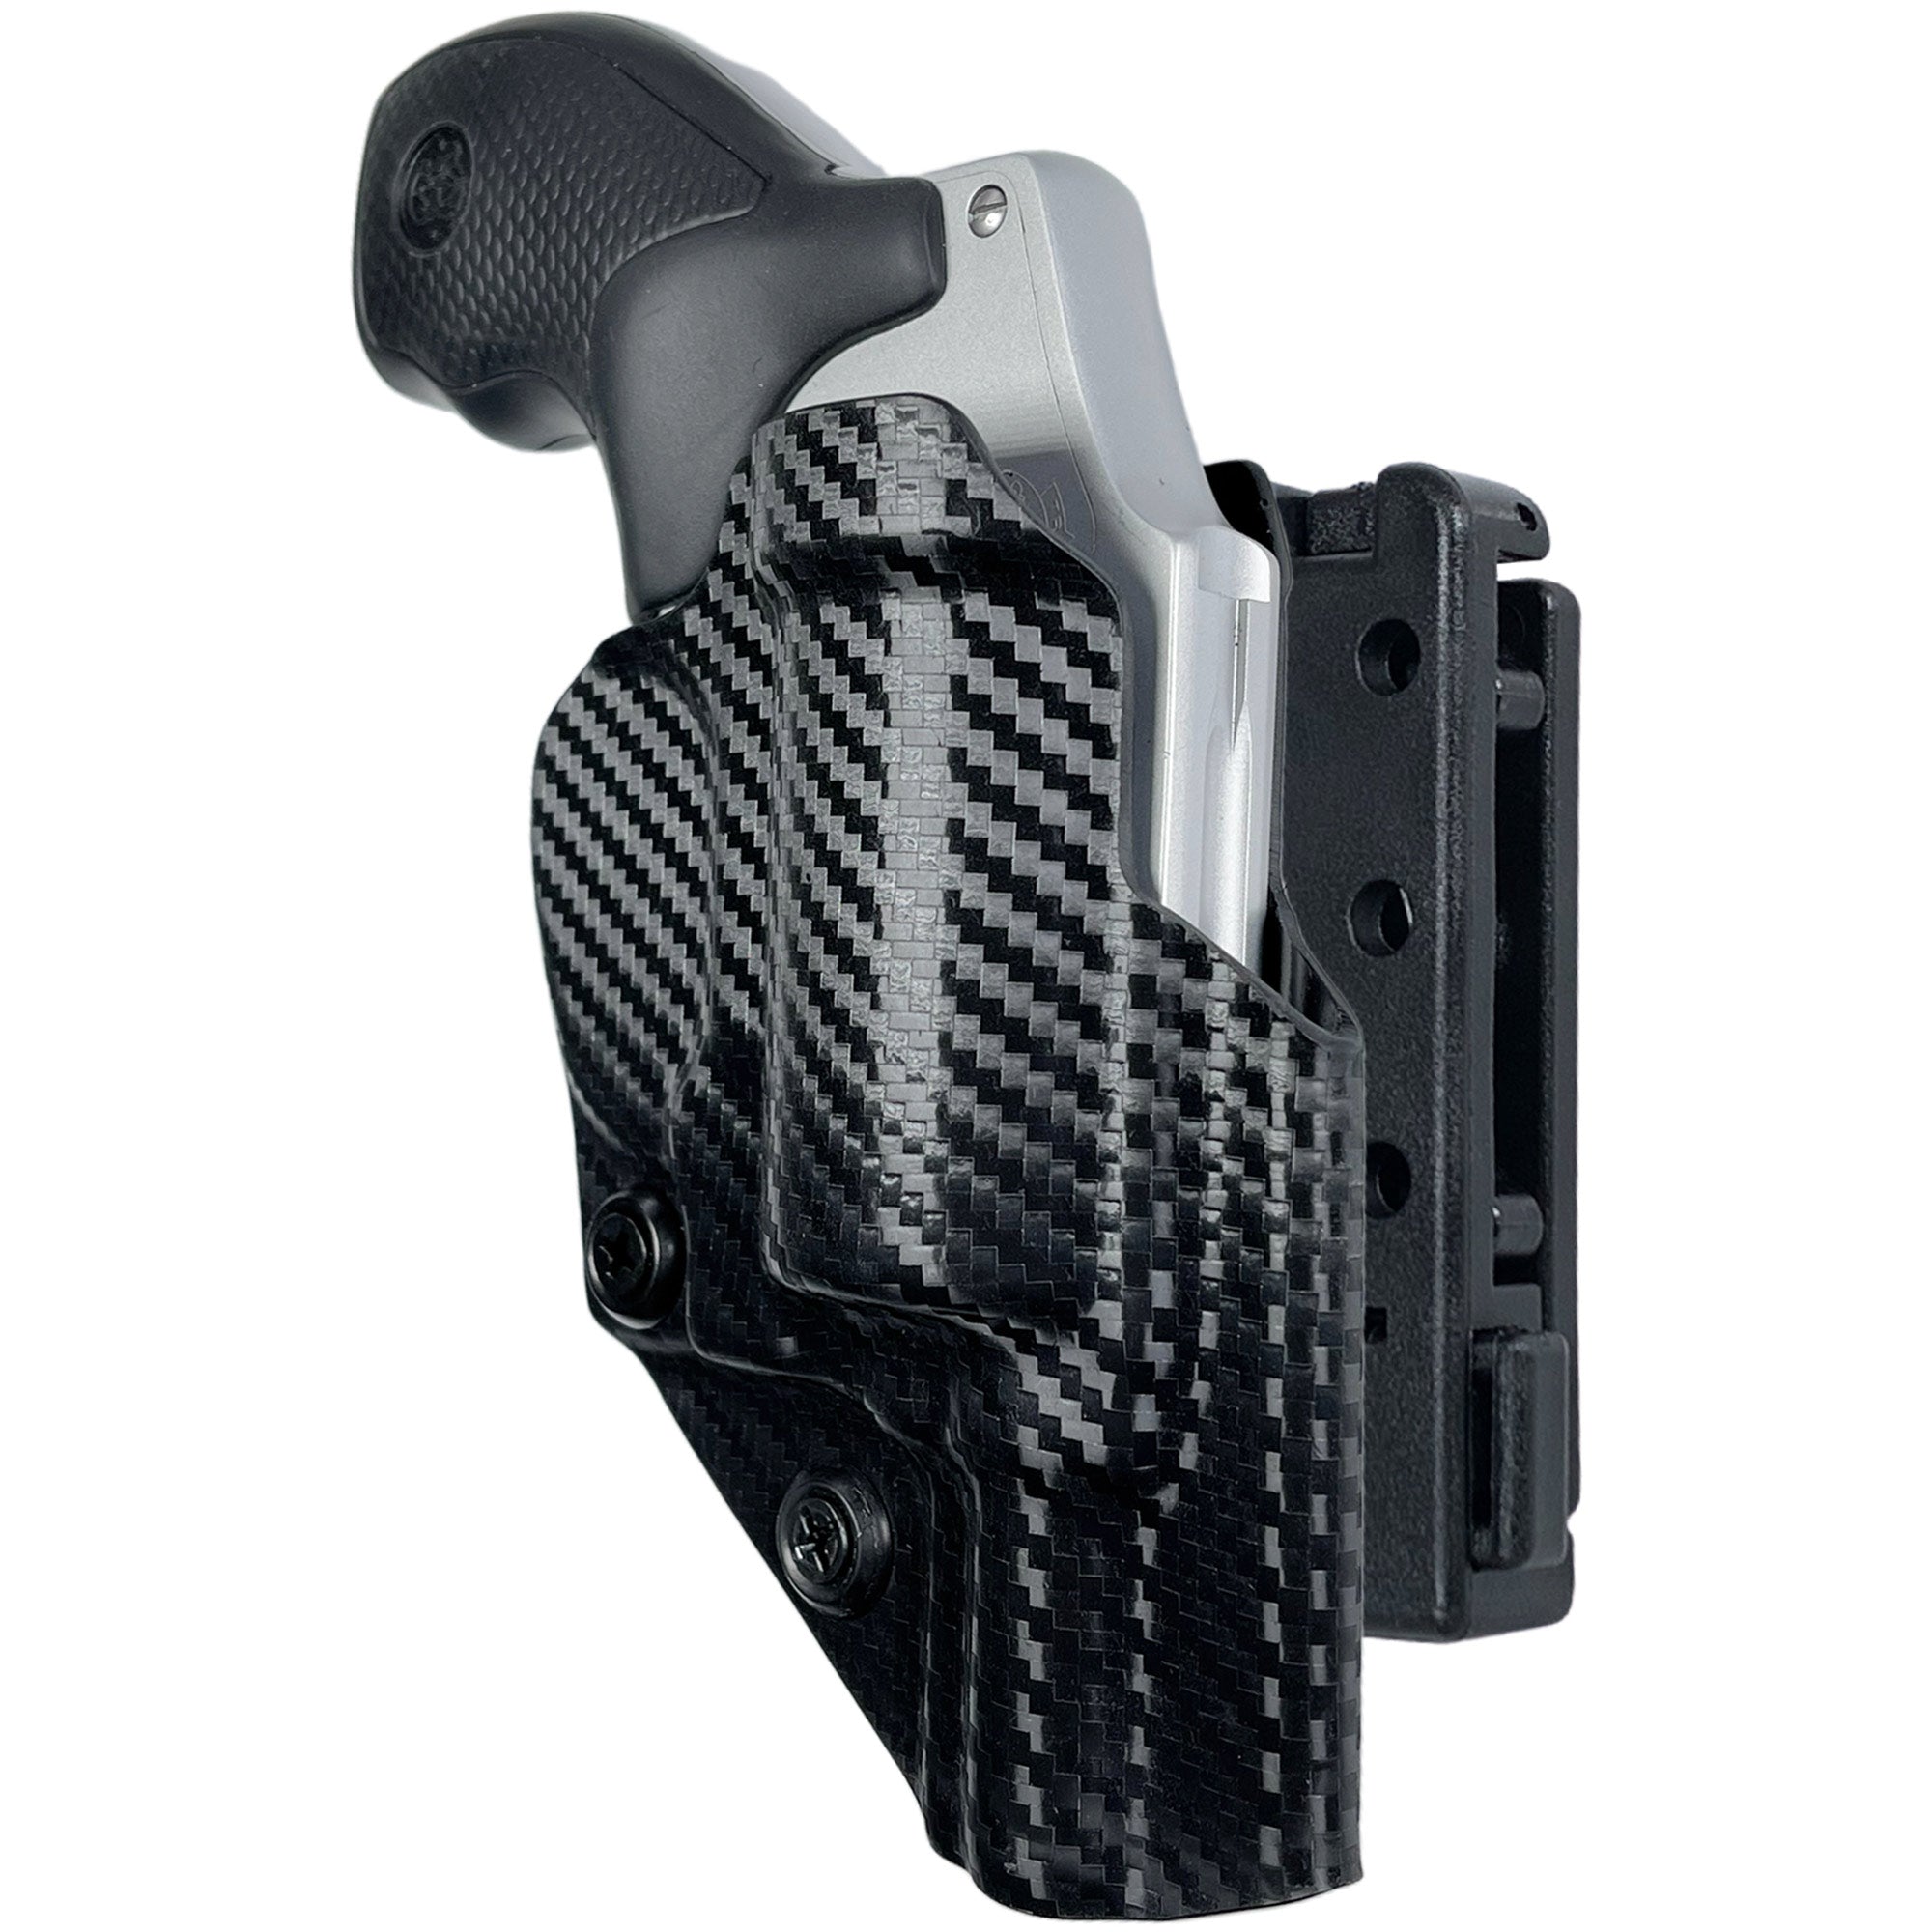 Smith & Wesson Model 642 Pro IDPA Competition Holster